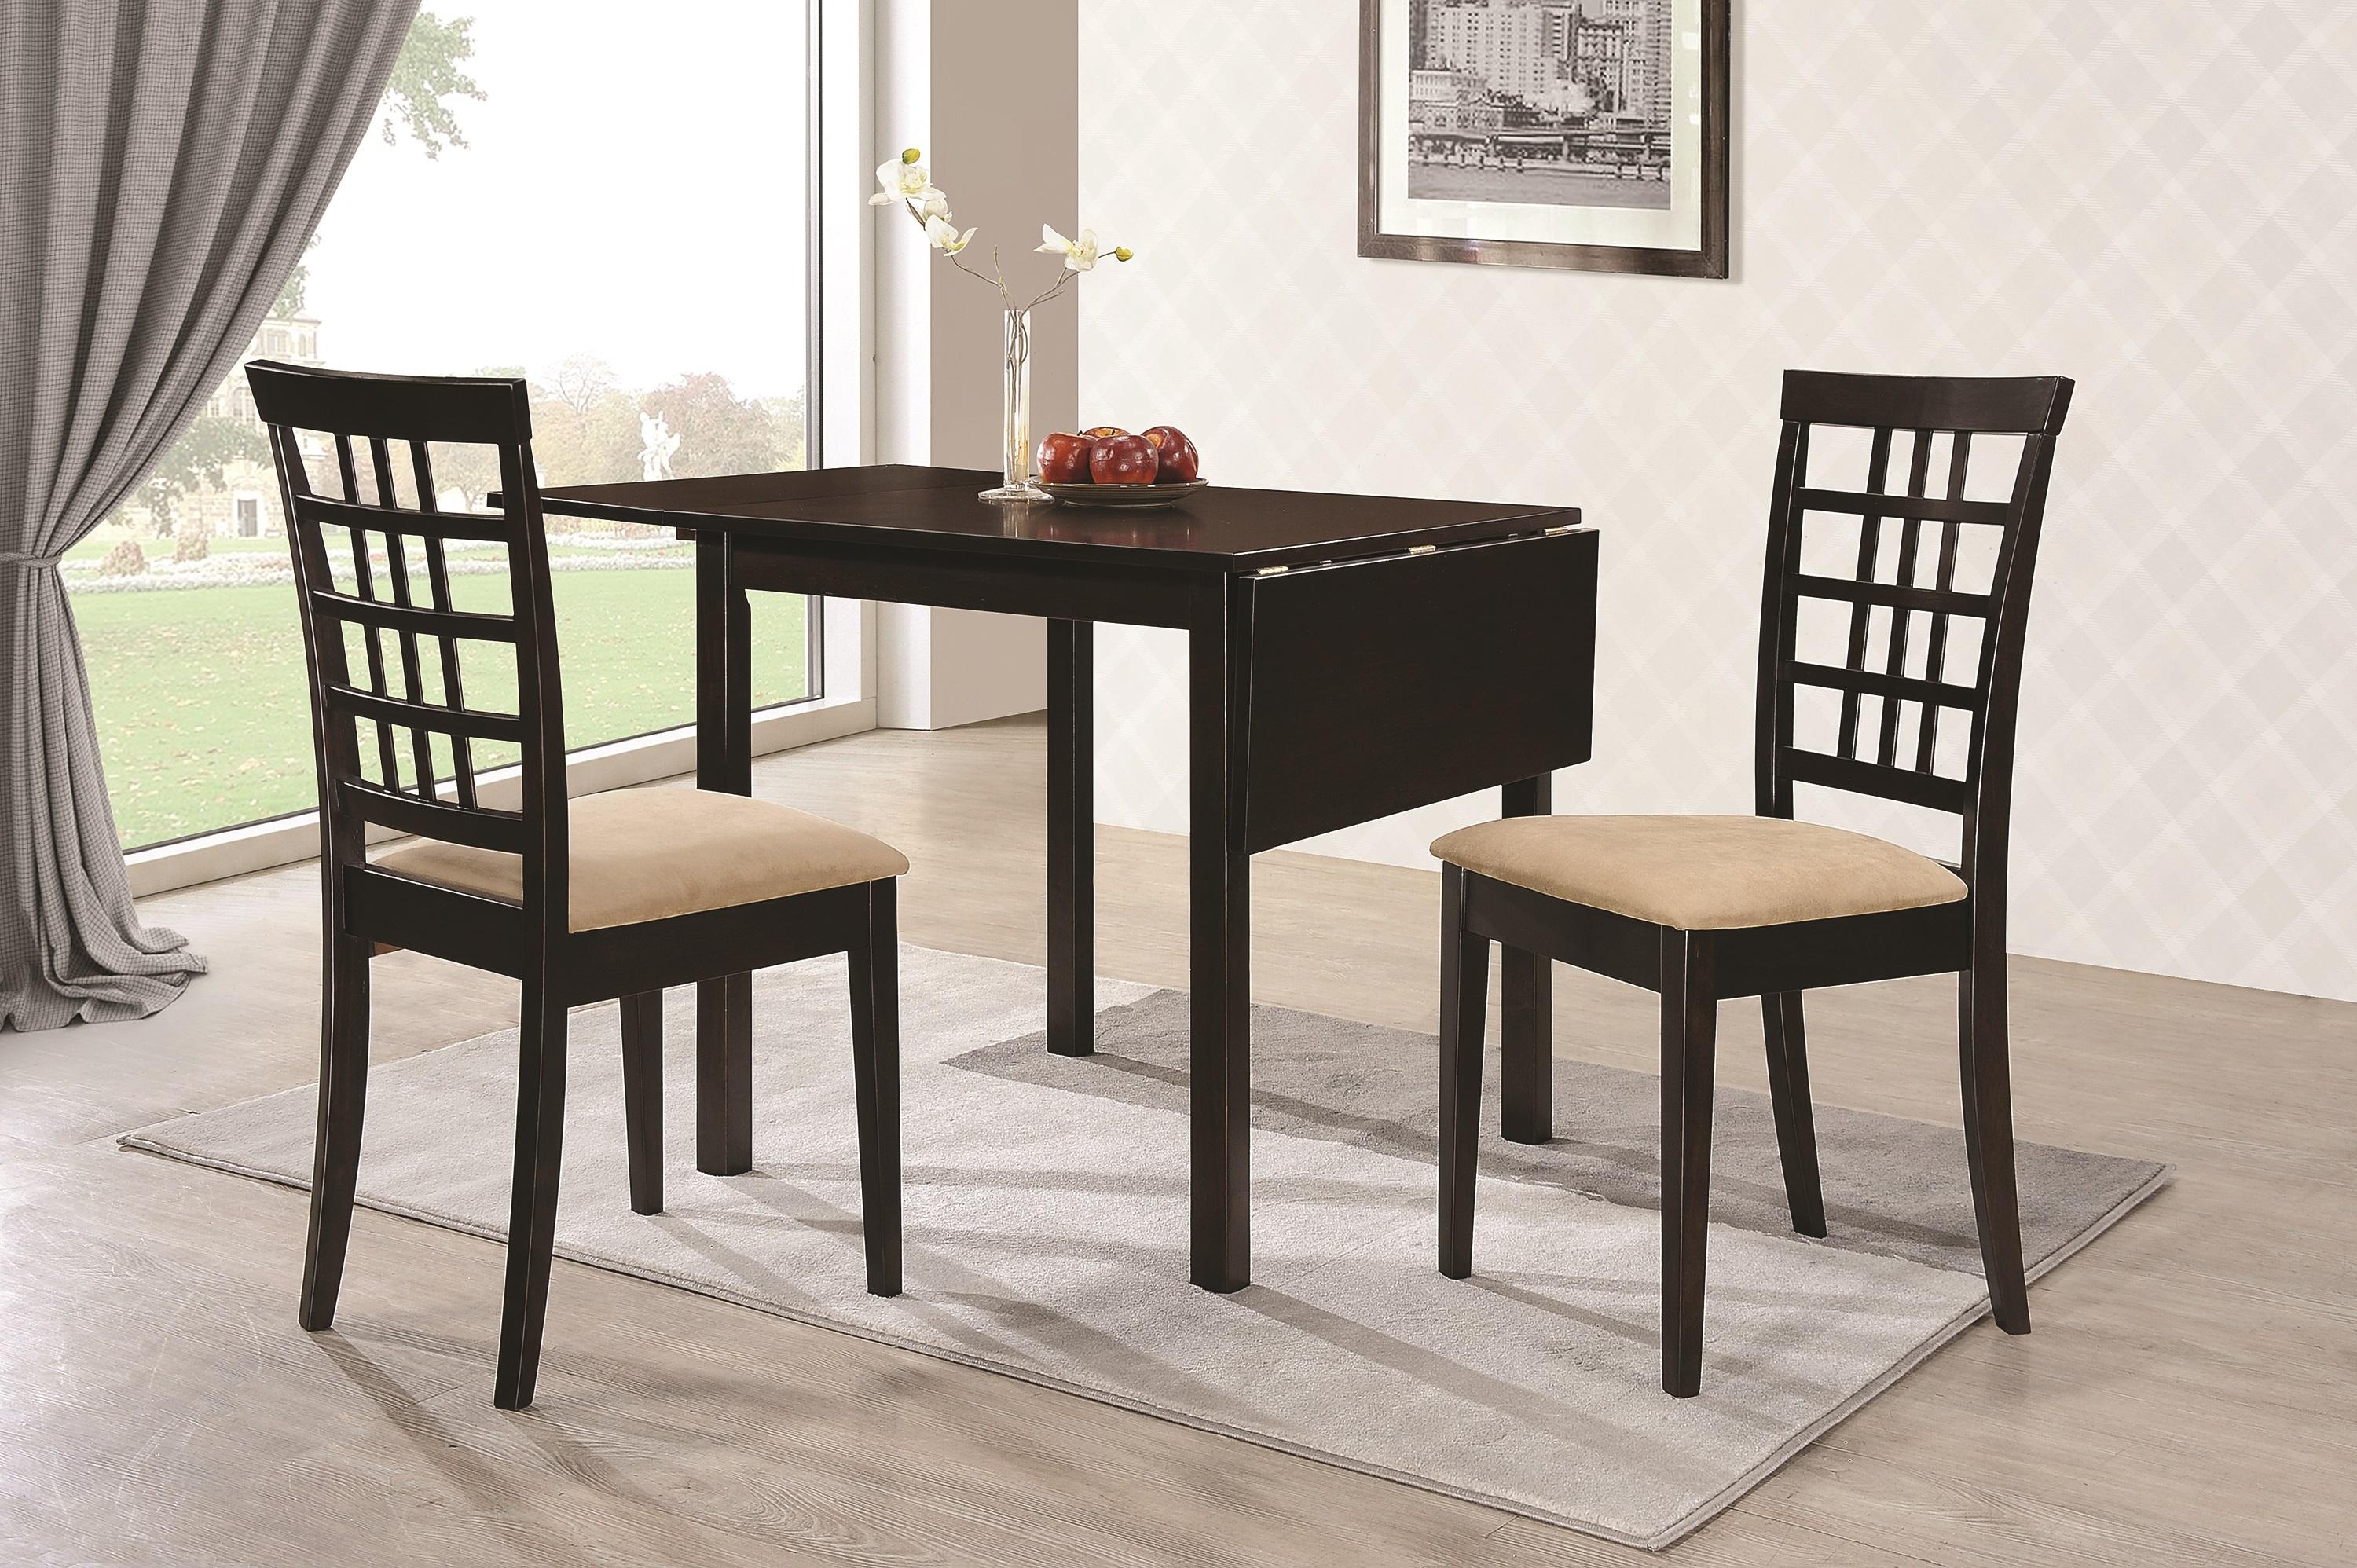 Transitional Dining Room Set 190821-S3 Kelso 190821-S3 in Cappuccino Fabric